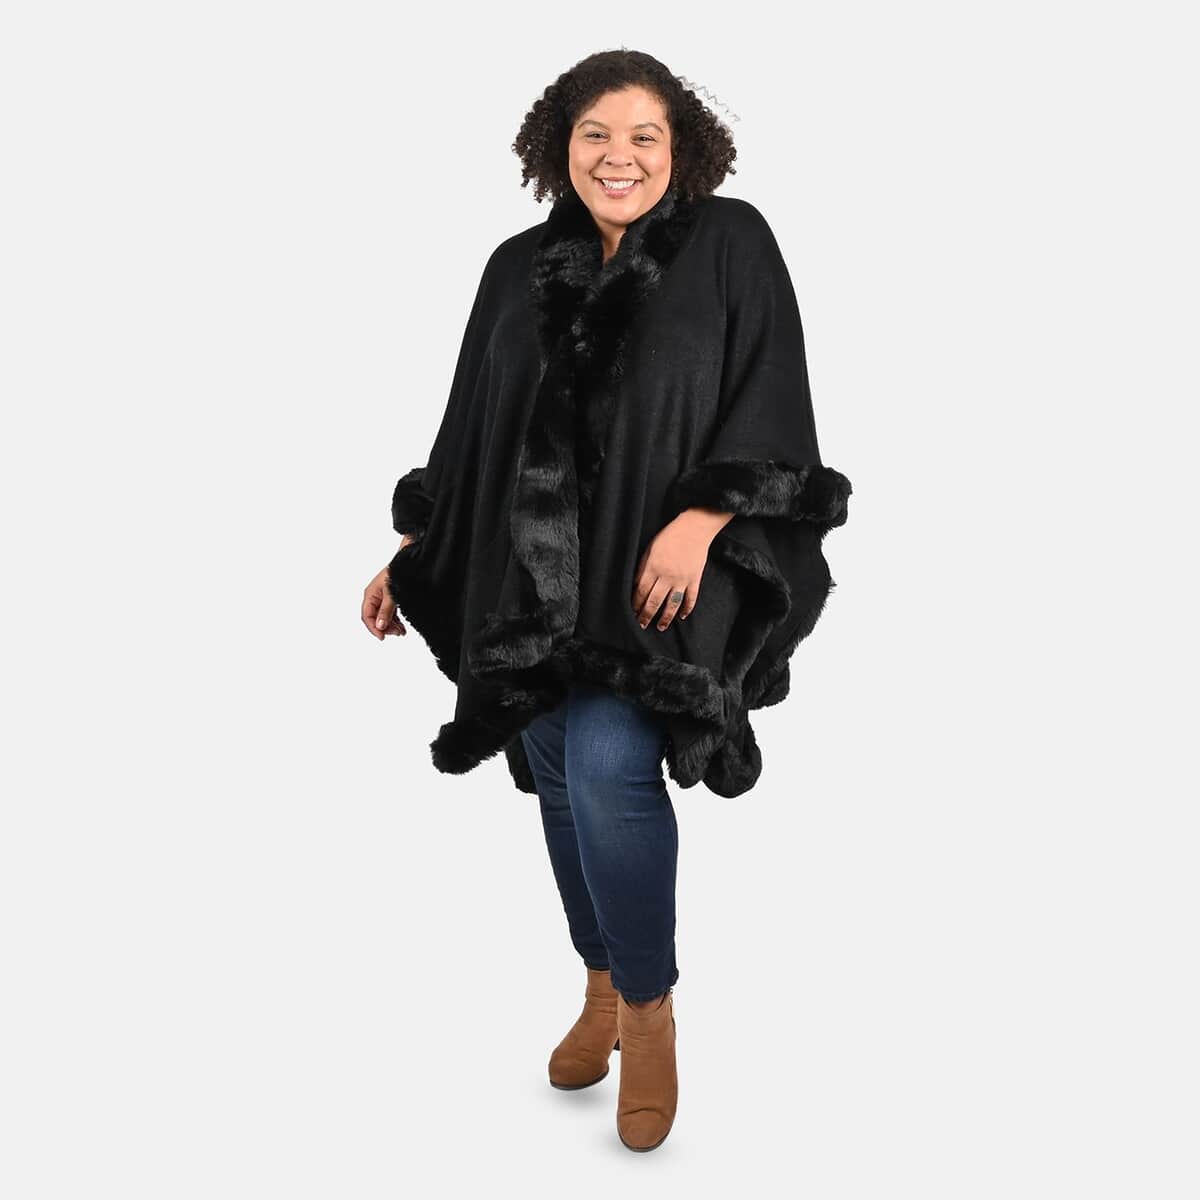 TAMSY Black Ruana with Faux Fur Trim - One Size Fits Most image number 0